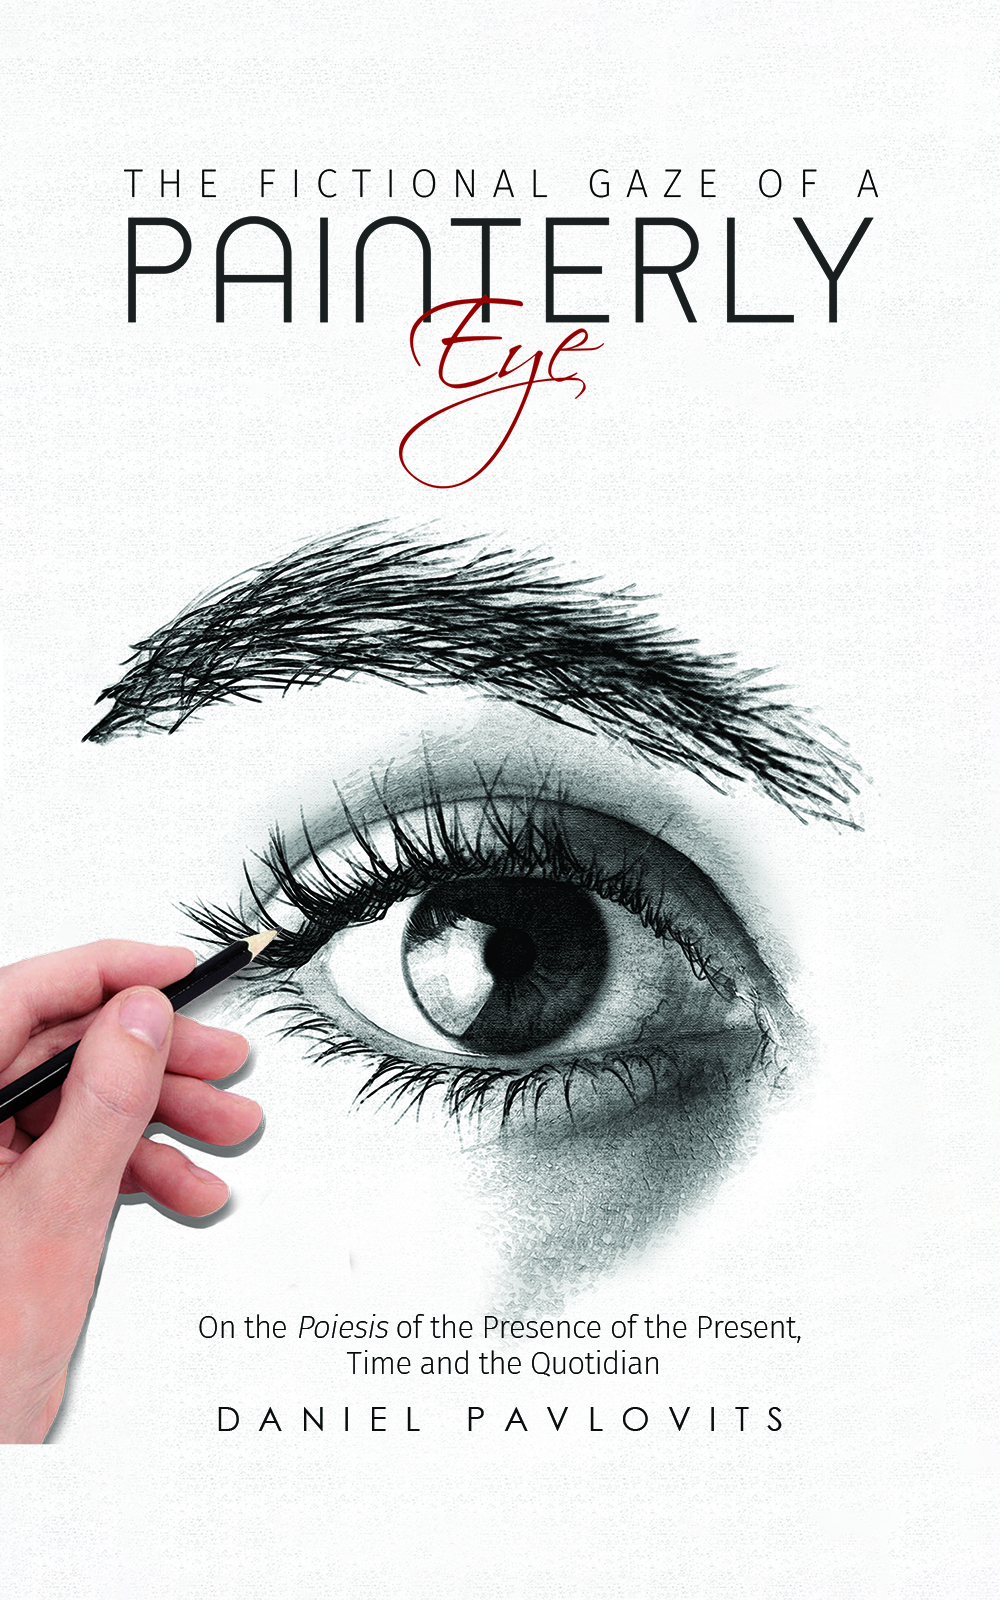 This image is the cover for the book The Fictional Gaze of a Painterly Eye